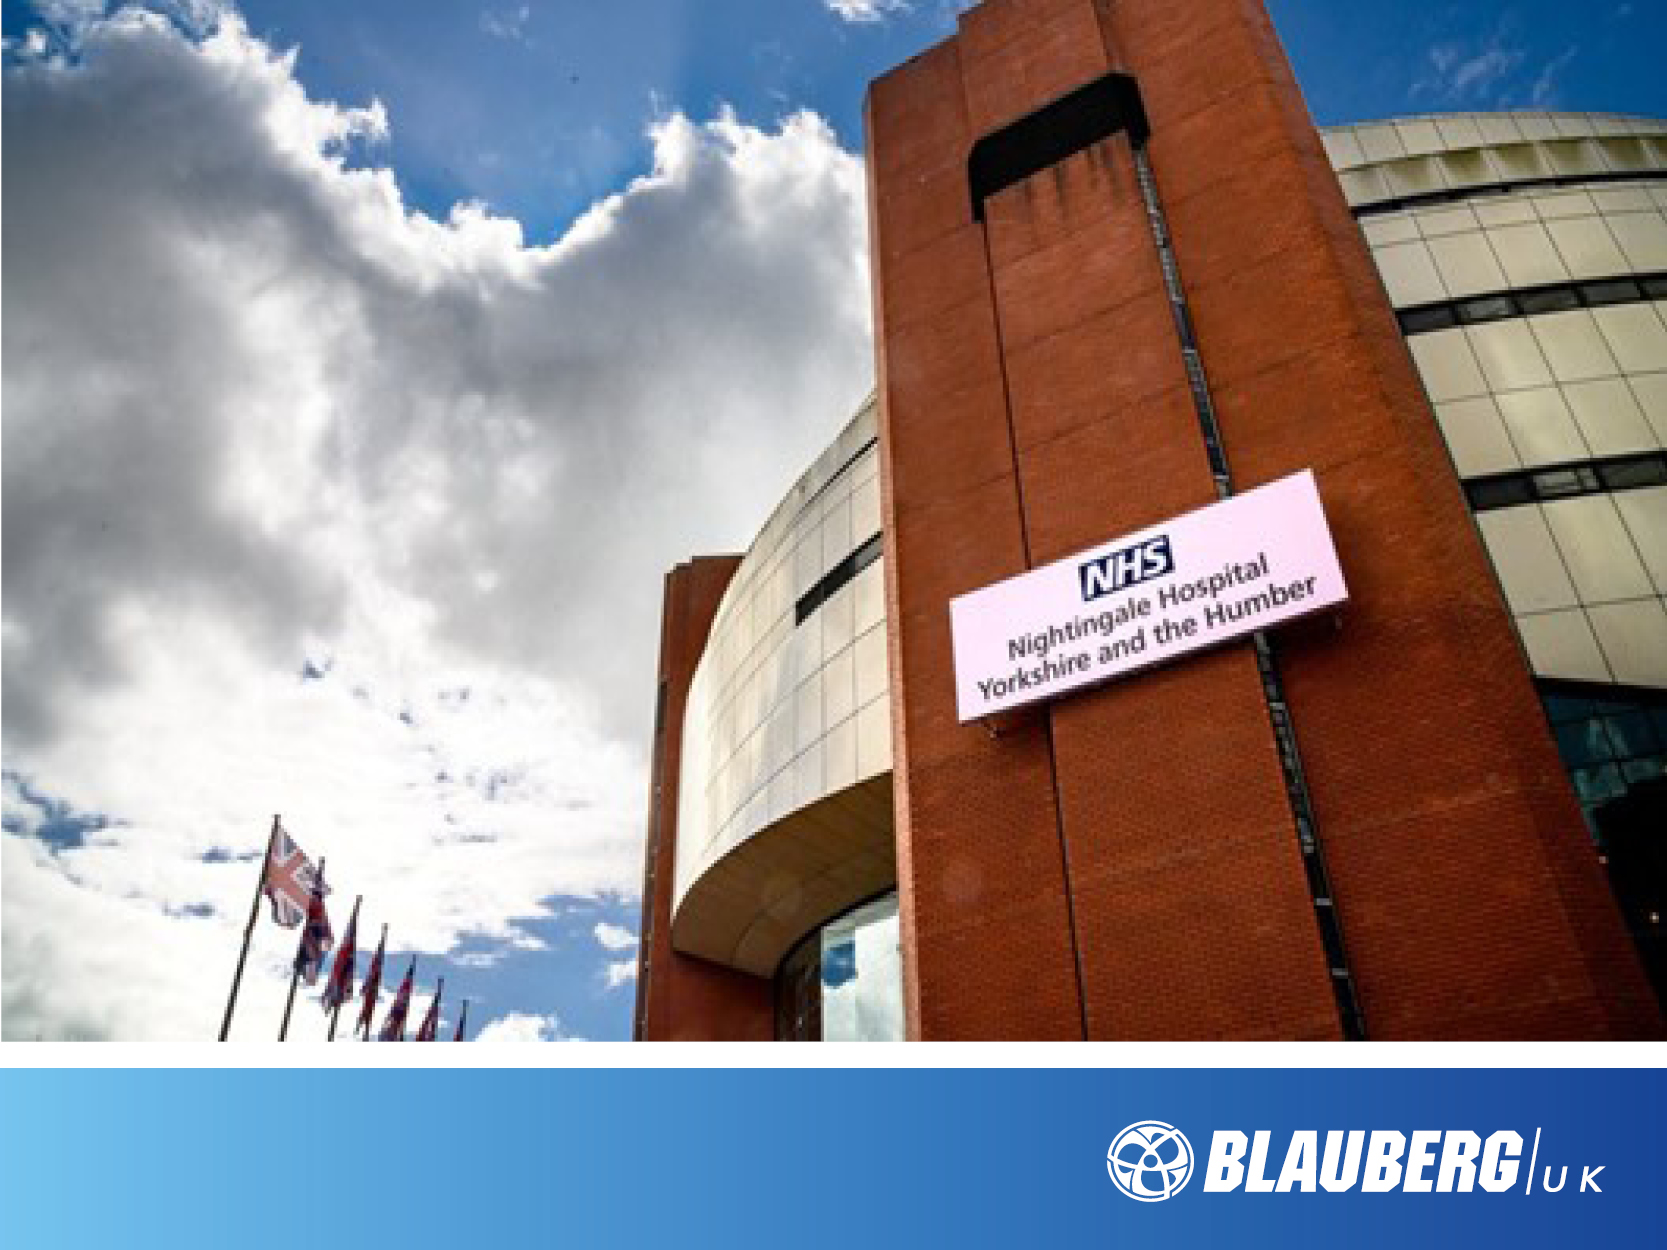 Nightingale Hospitals - Blauberg UK play their part for our NHS - 2020